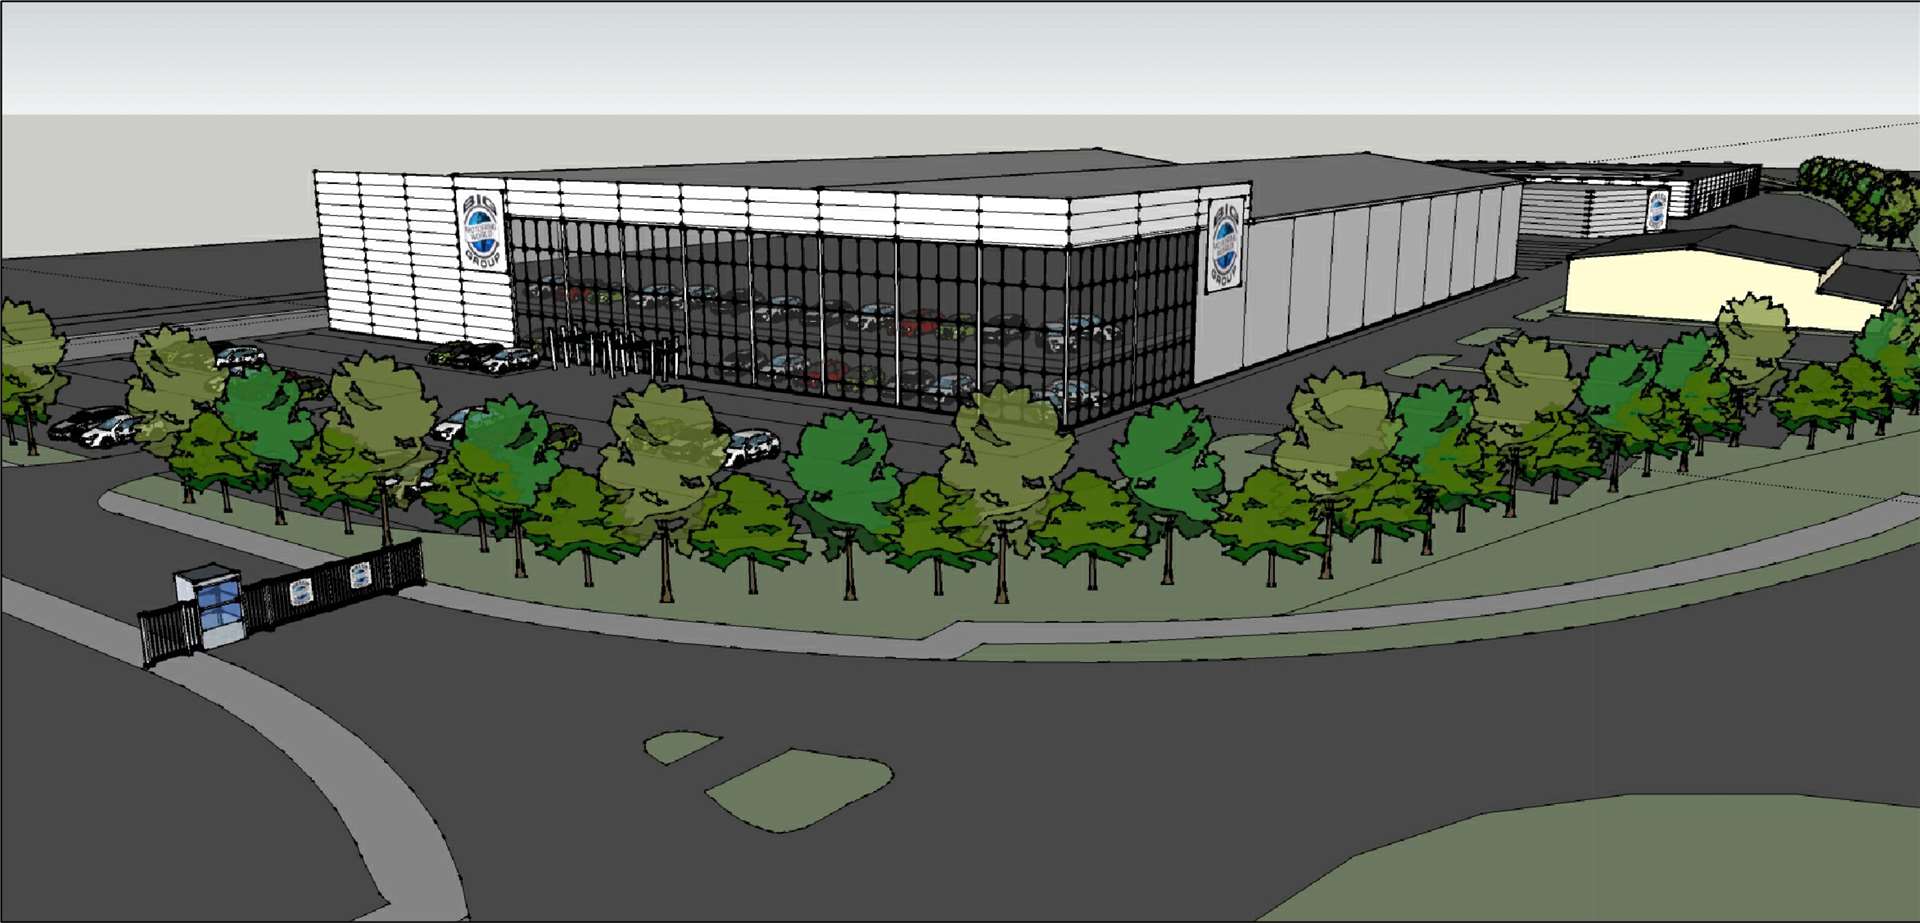 An artists impression of the new Big Motoring World depot at Blue Bell Hill